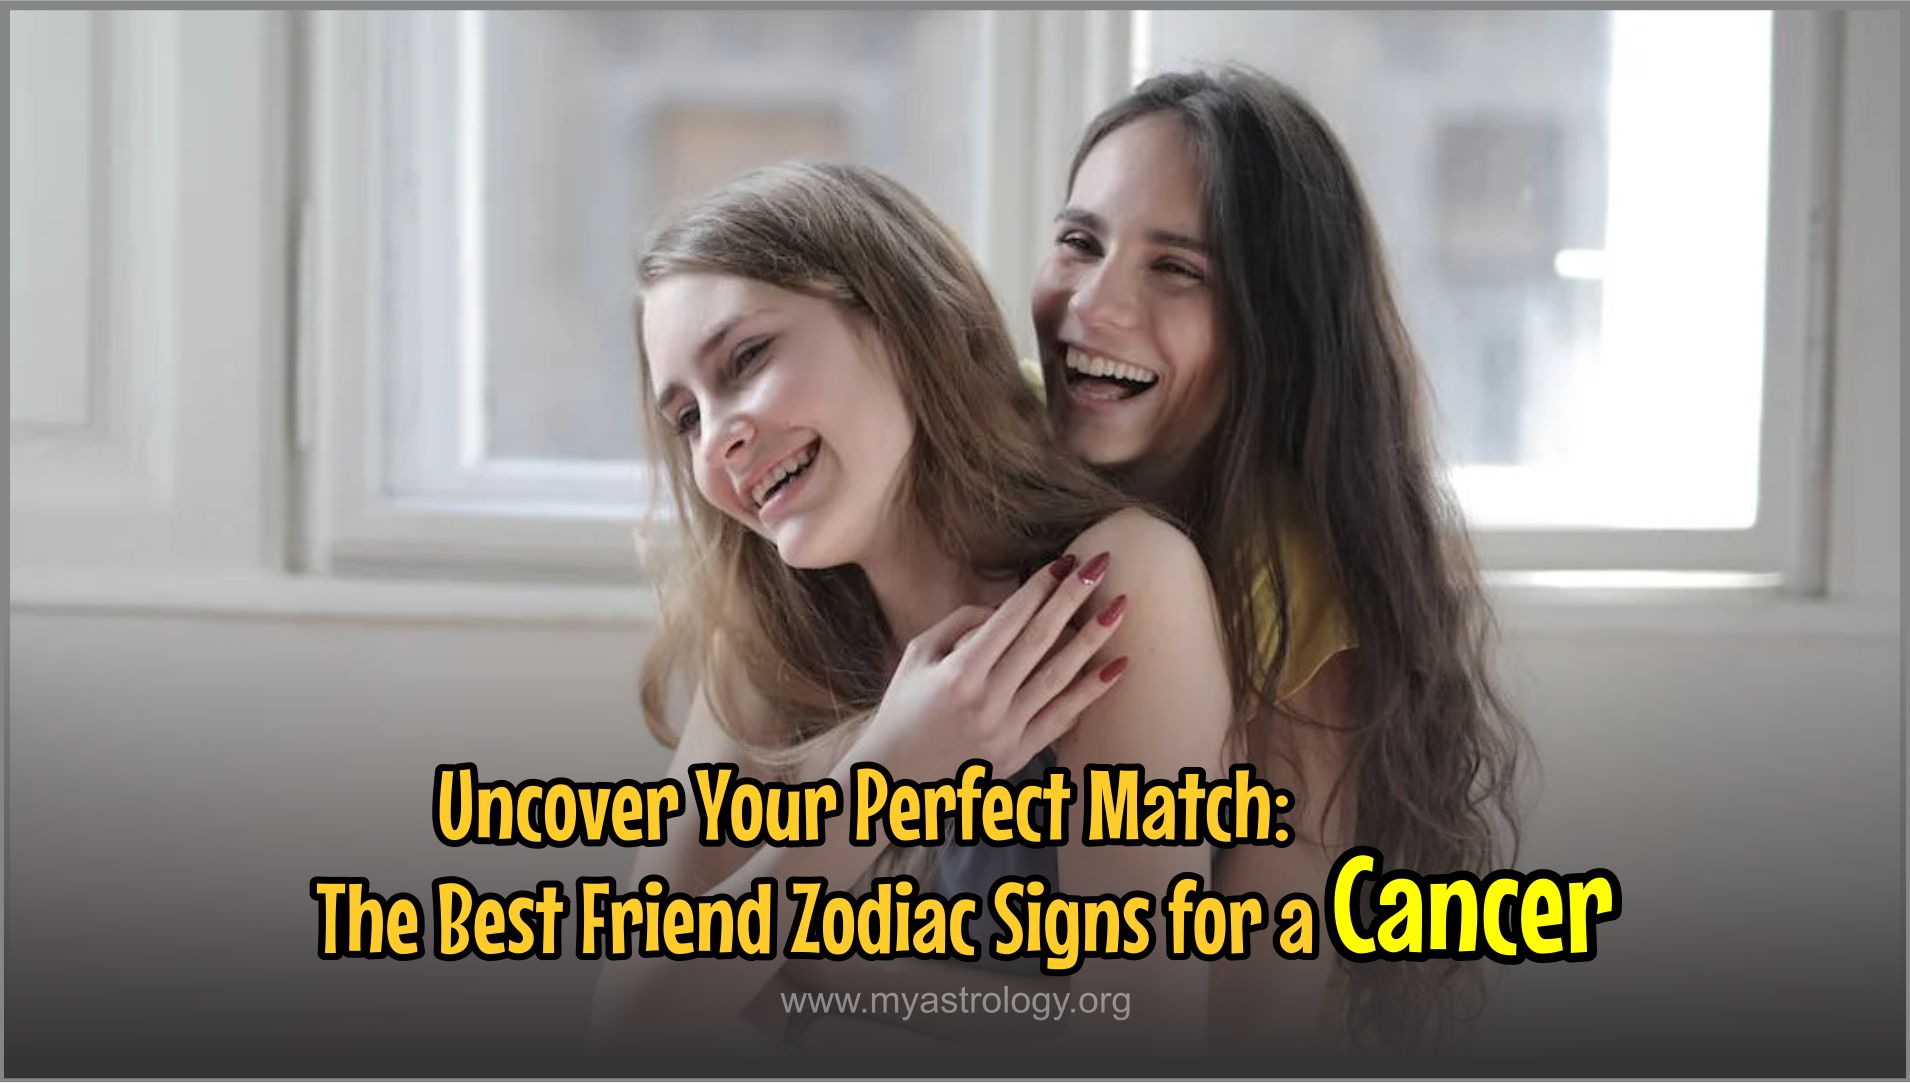 Uncover Your Perfect Match: The Best Friend Zodiac Signs for a Cancer